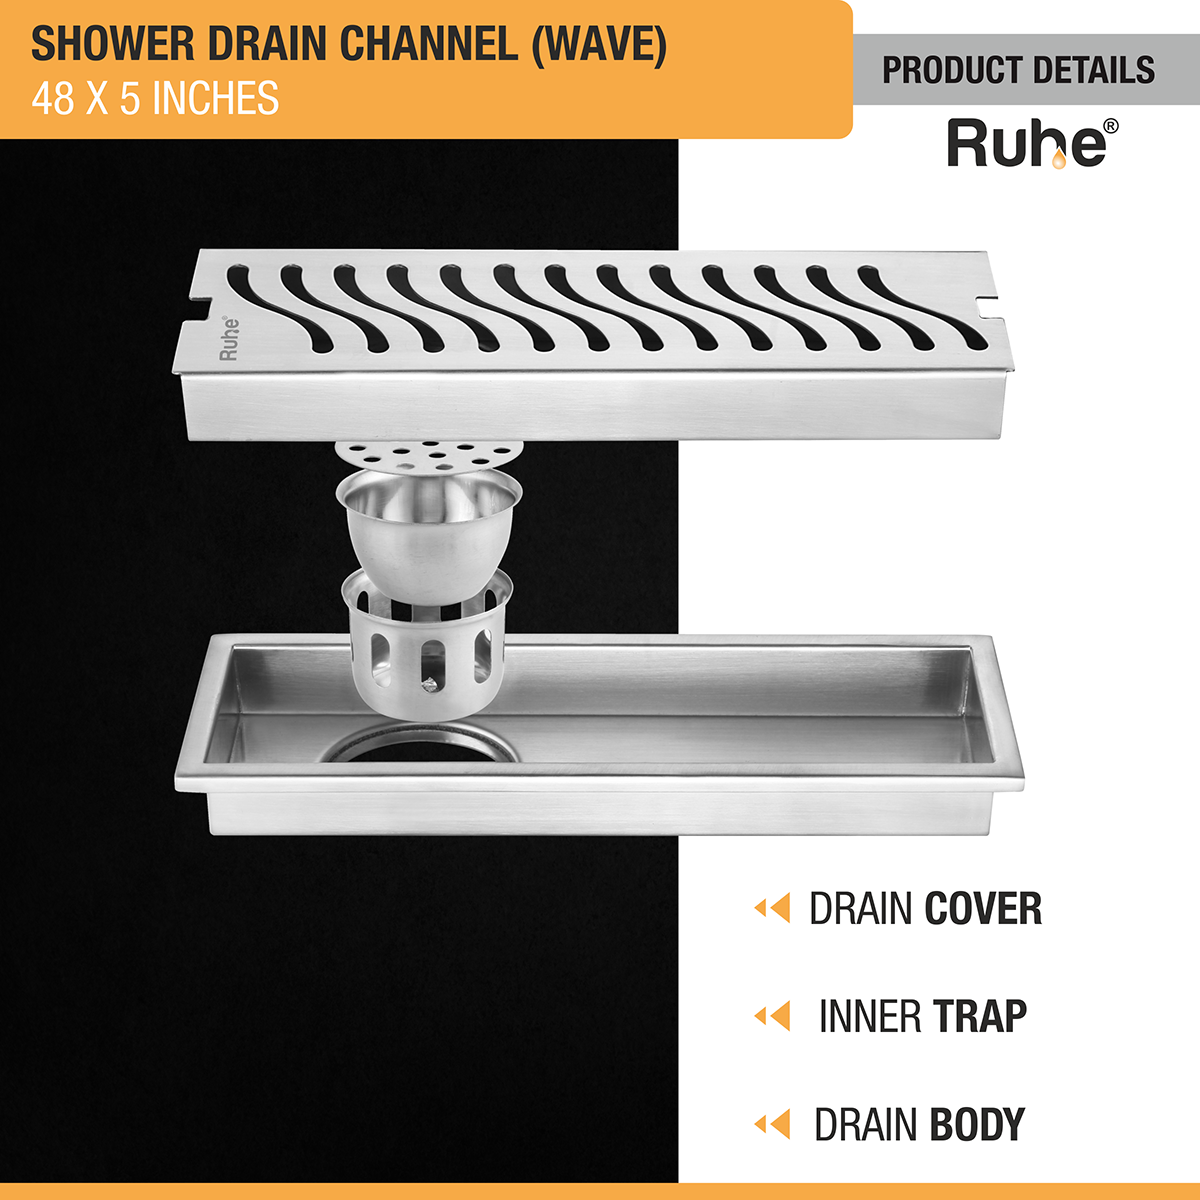 Wave Shower Drain Channel (48 X 5 Inches) with Cockroach Trap (304 Grade) product details